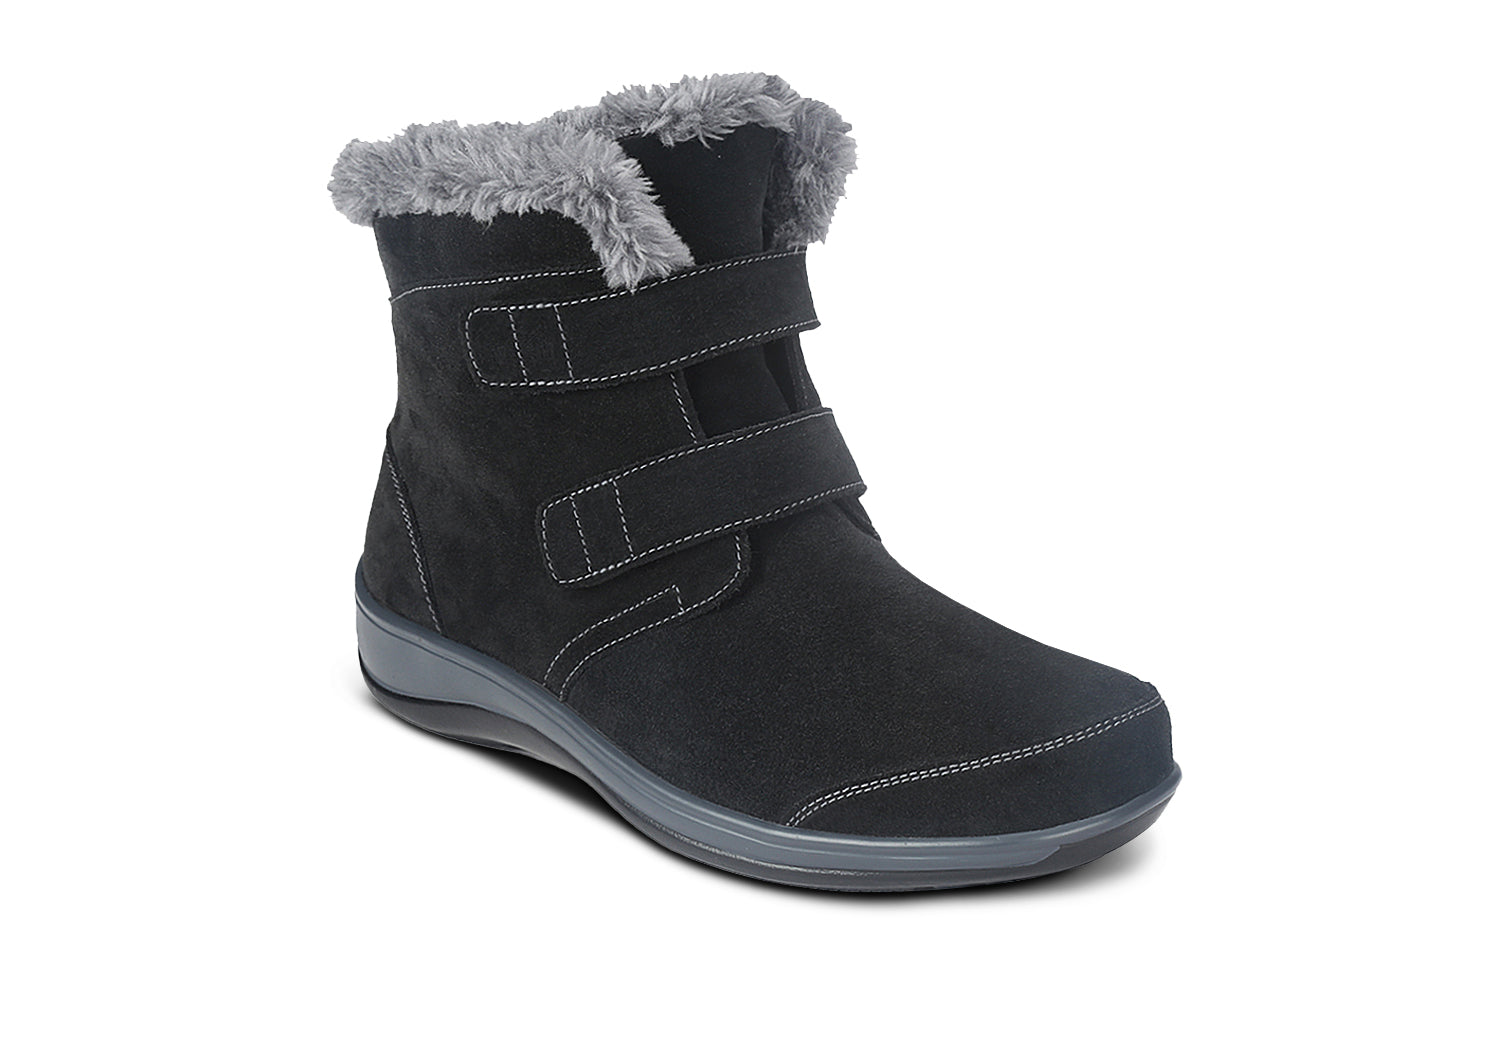 Women's Warm Winter Boots with Fur | OrthoFeet Florence Black